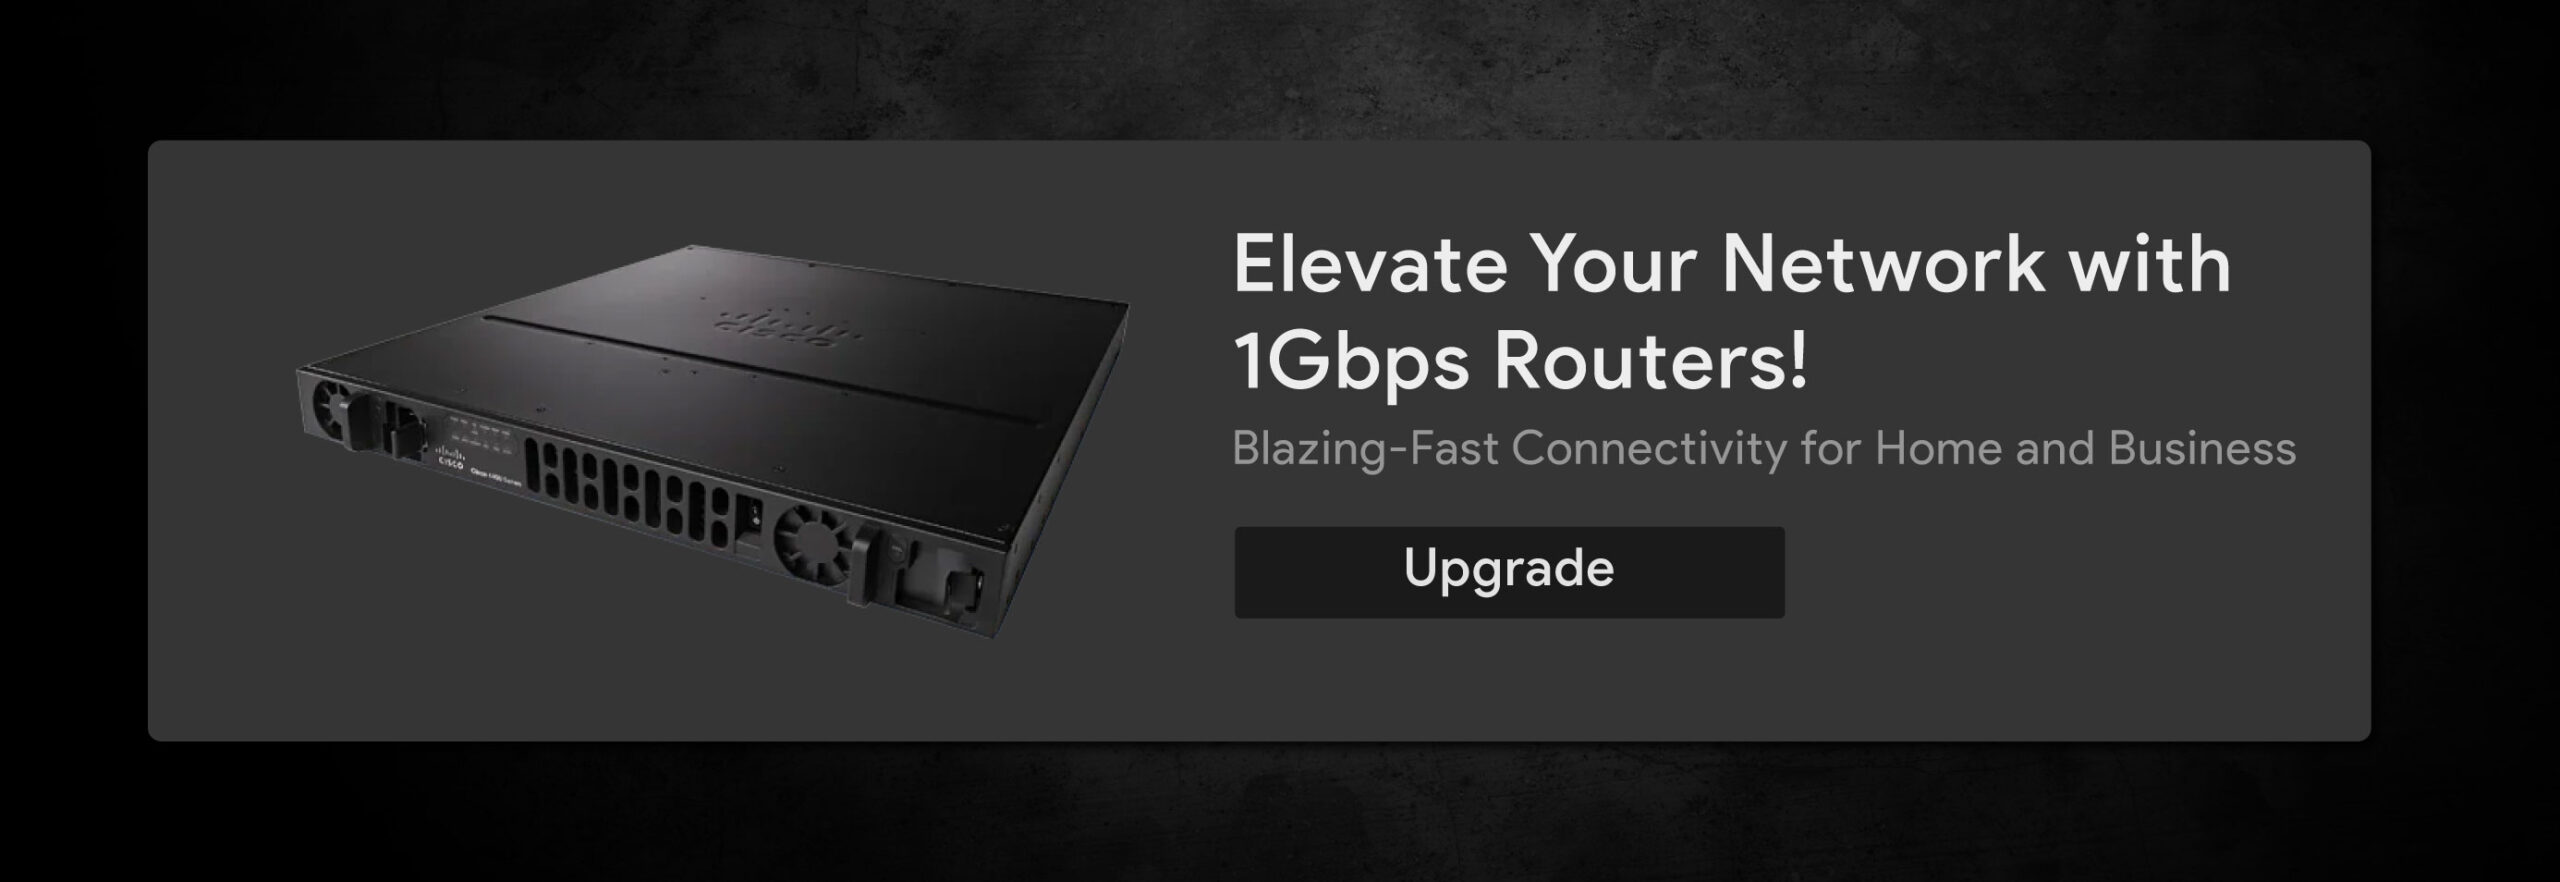 1Gbps-Routers